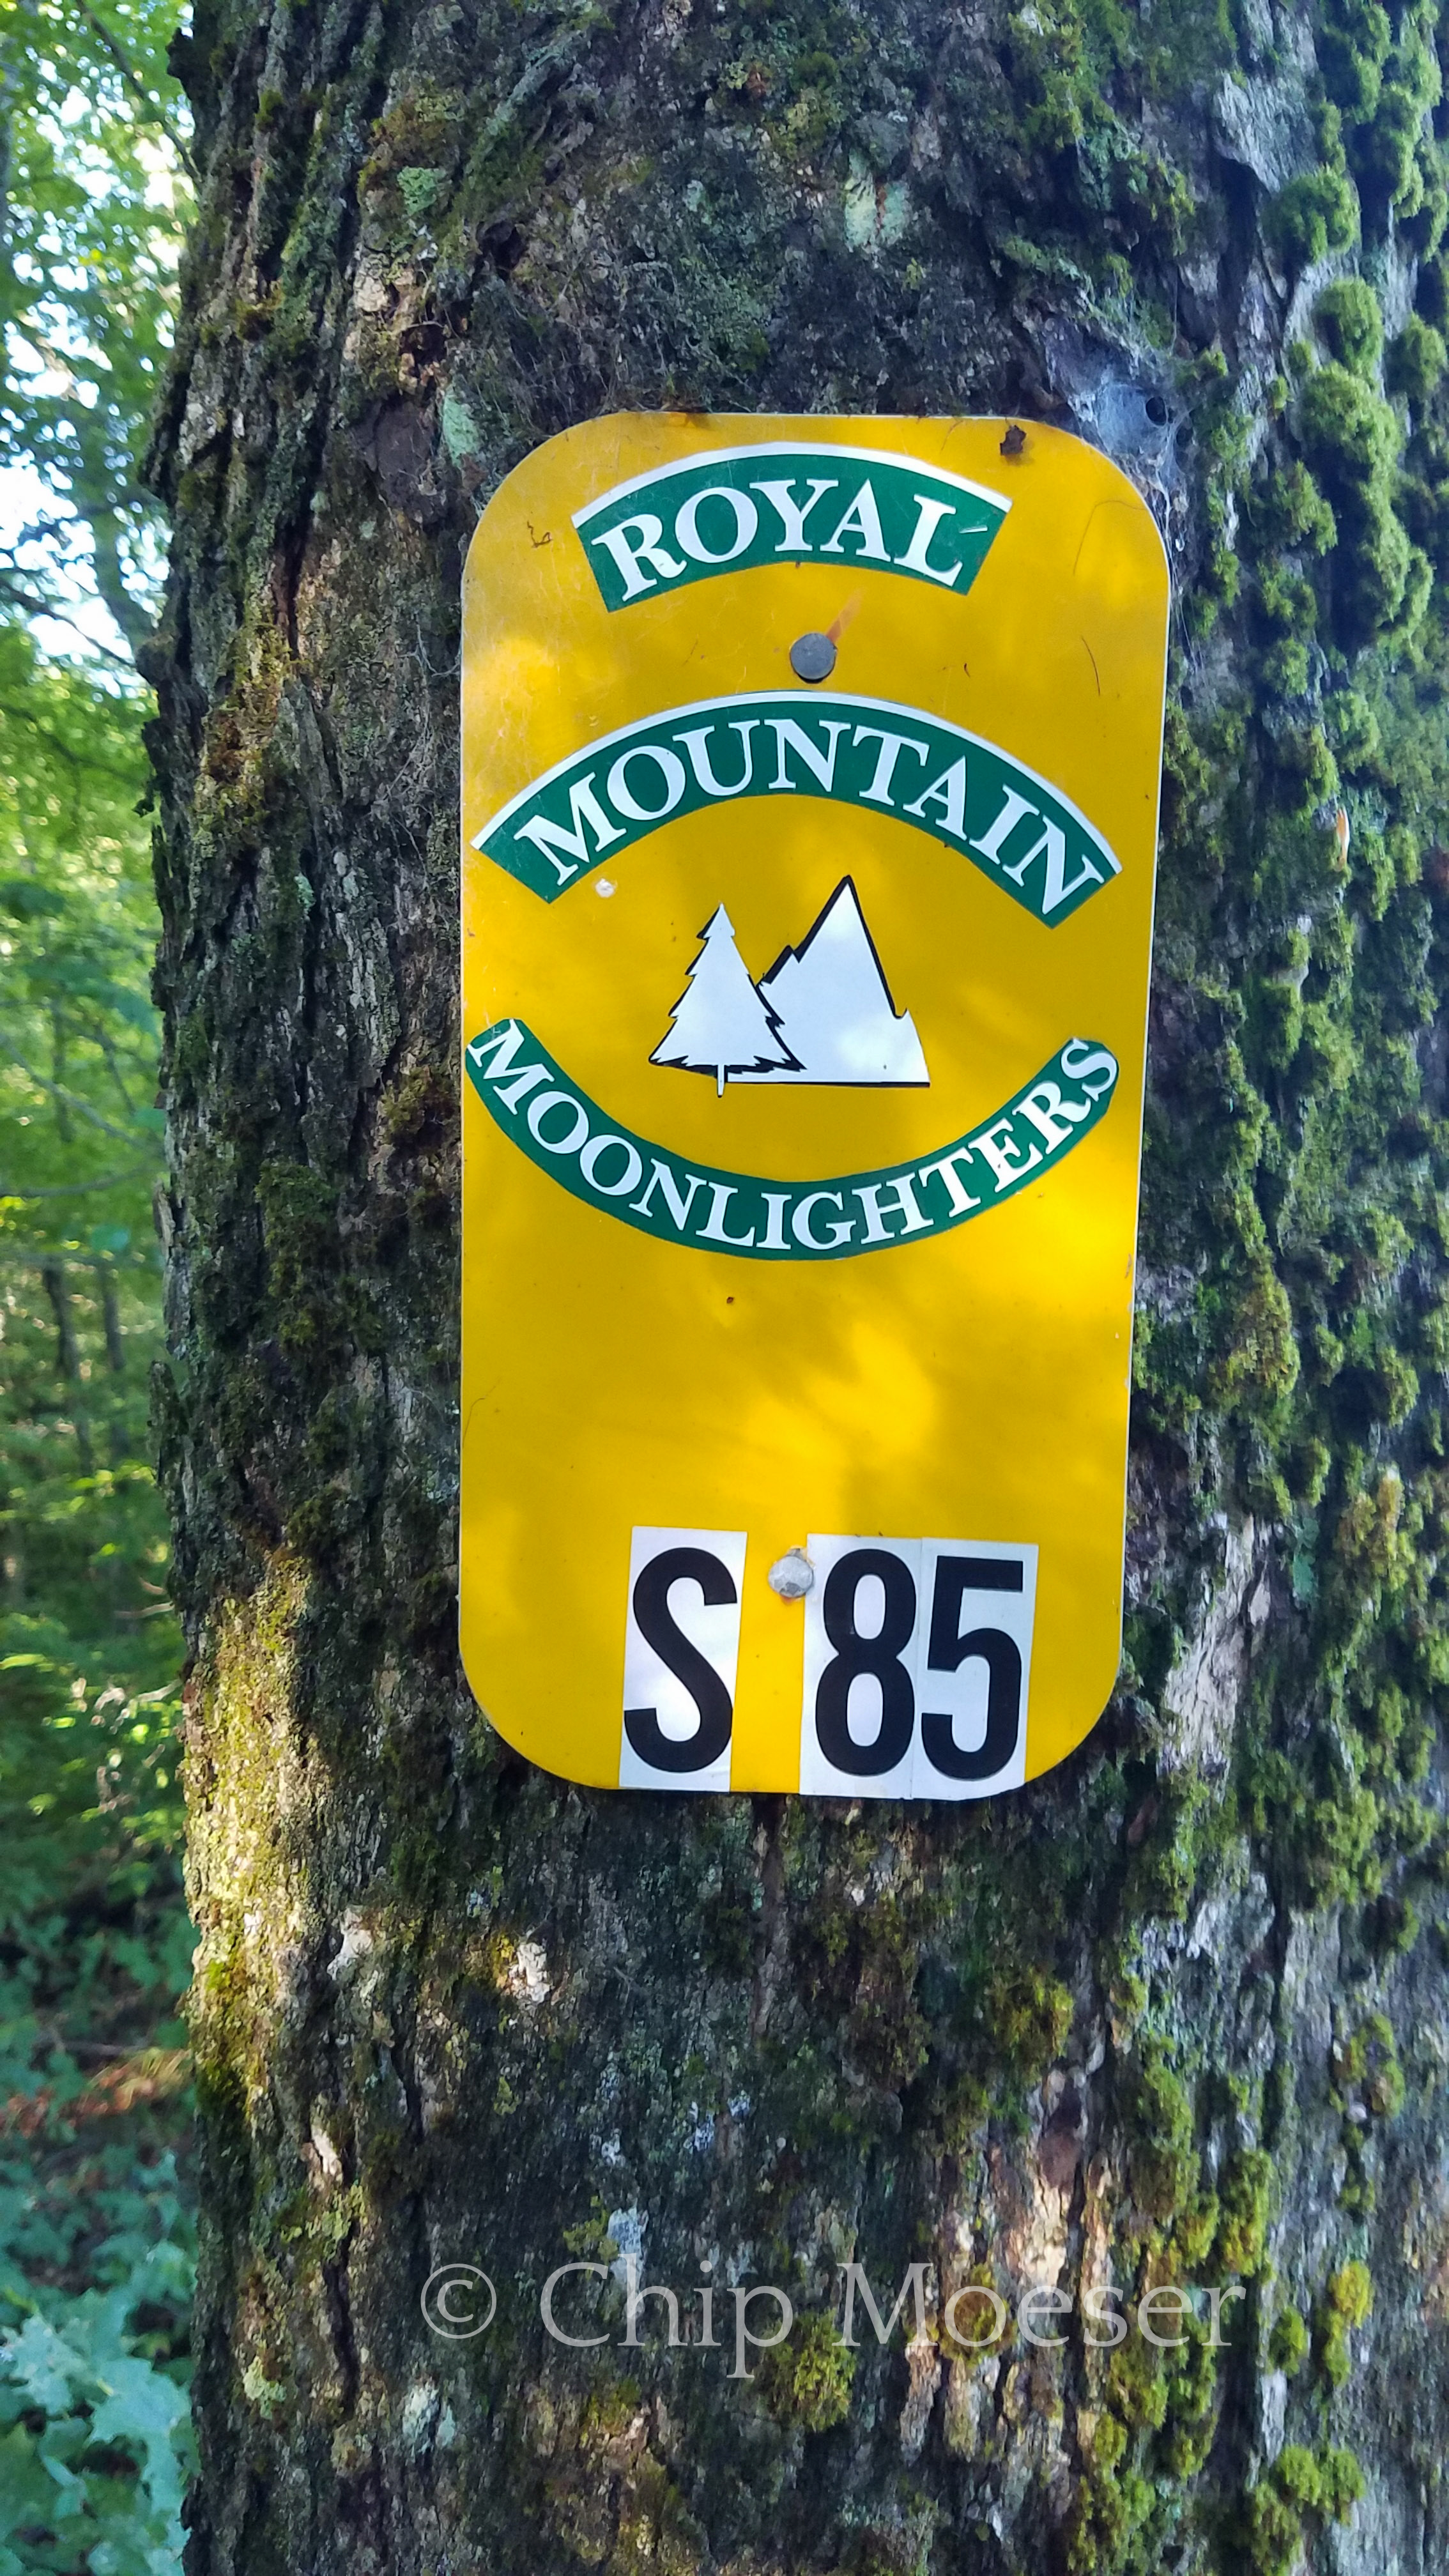 Royal Mountain Moonlighters